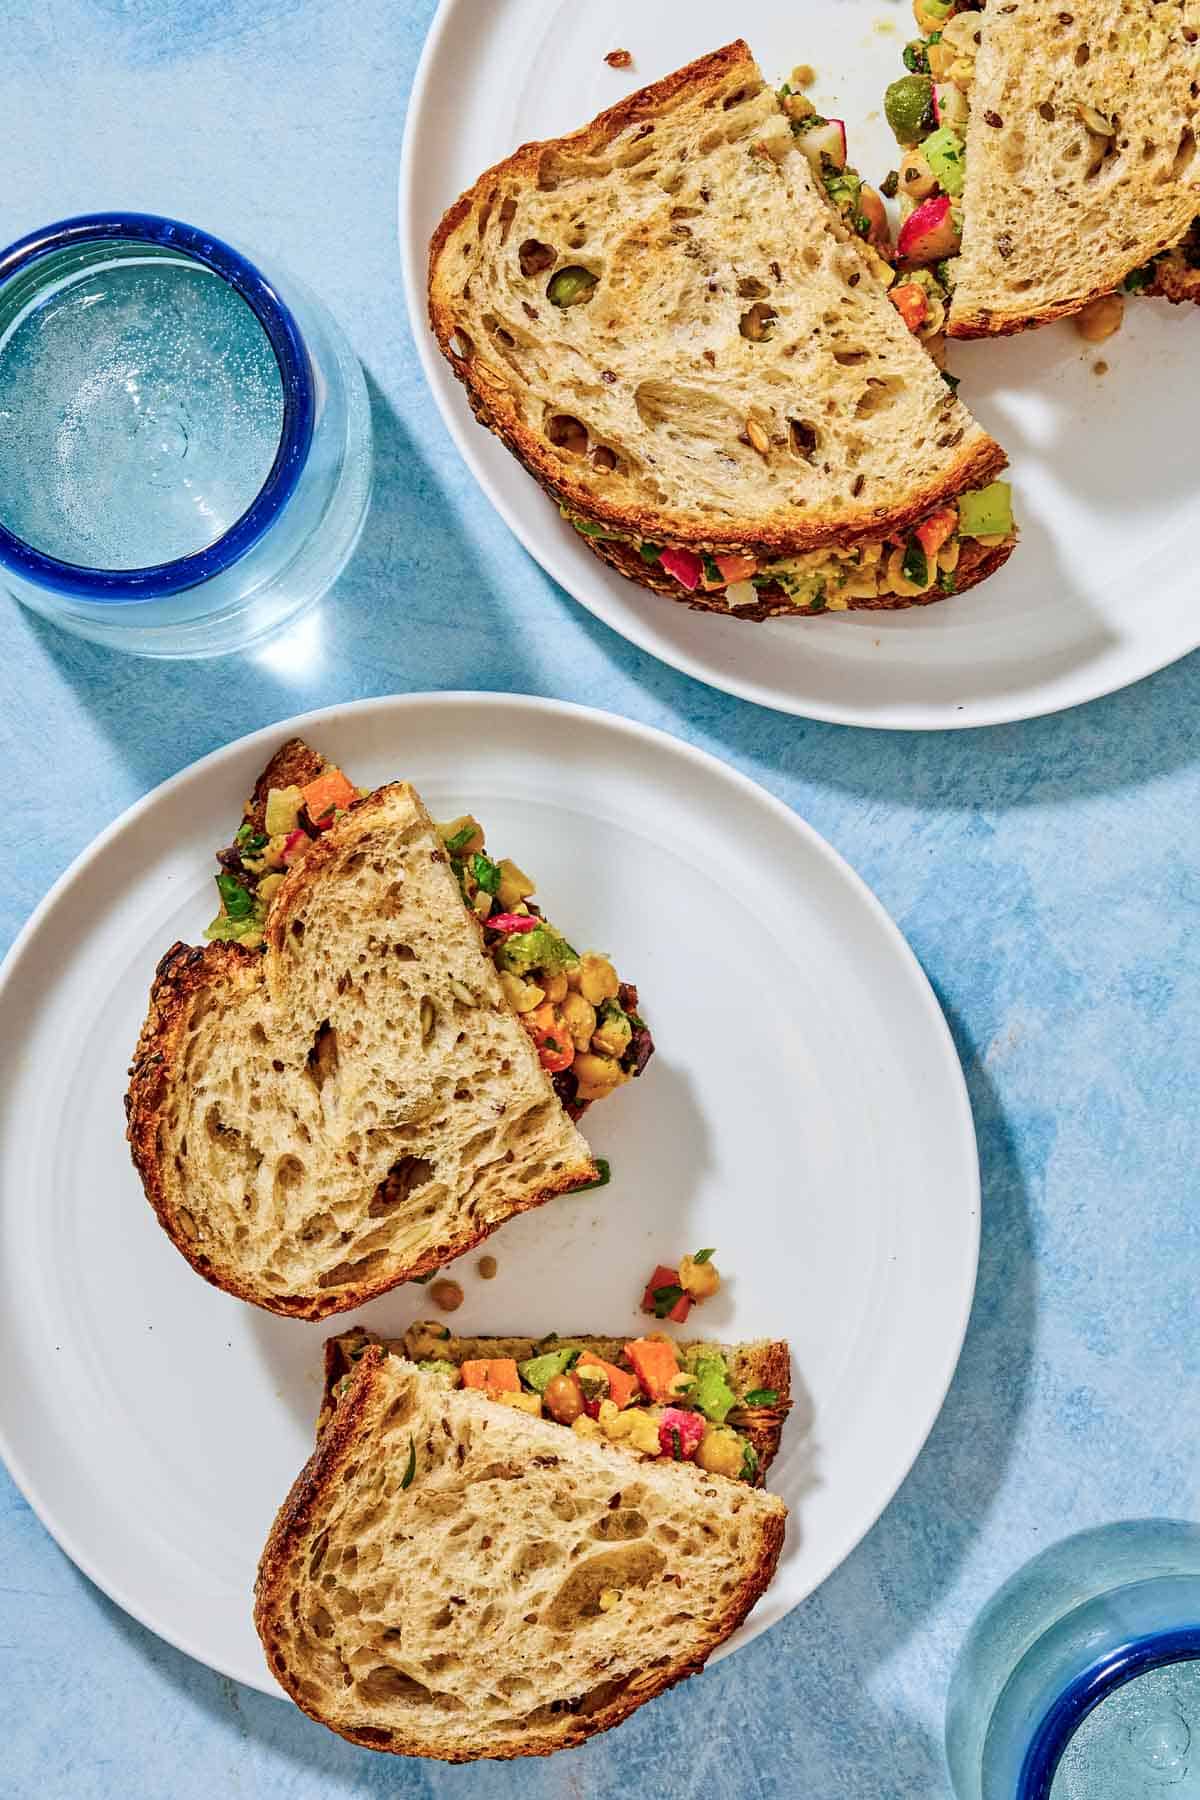 An overhead photo of two plates, each containing 2 vegan chickpea salad sandwich halves, next to two glasses of water.